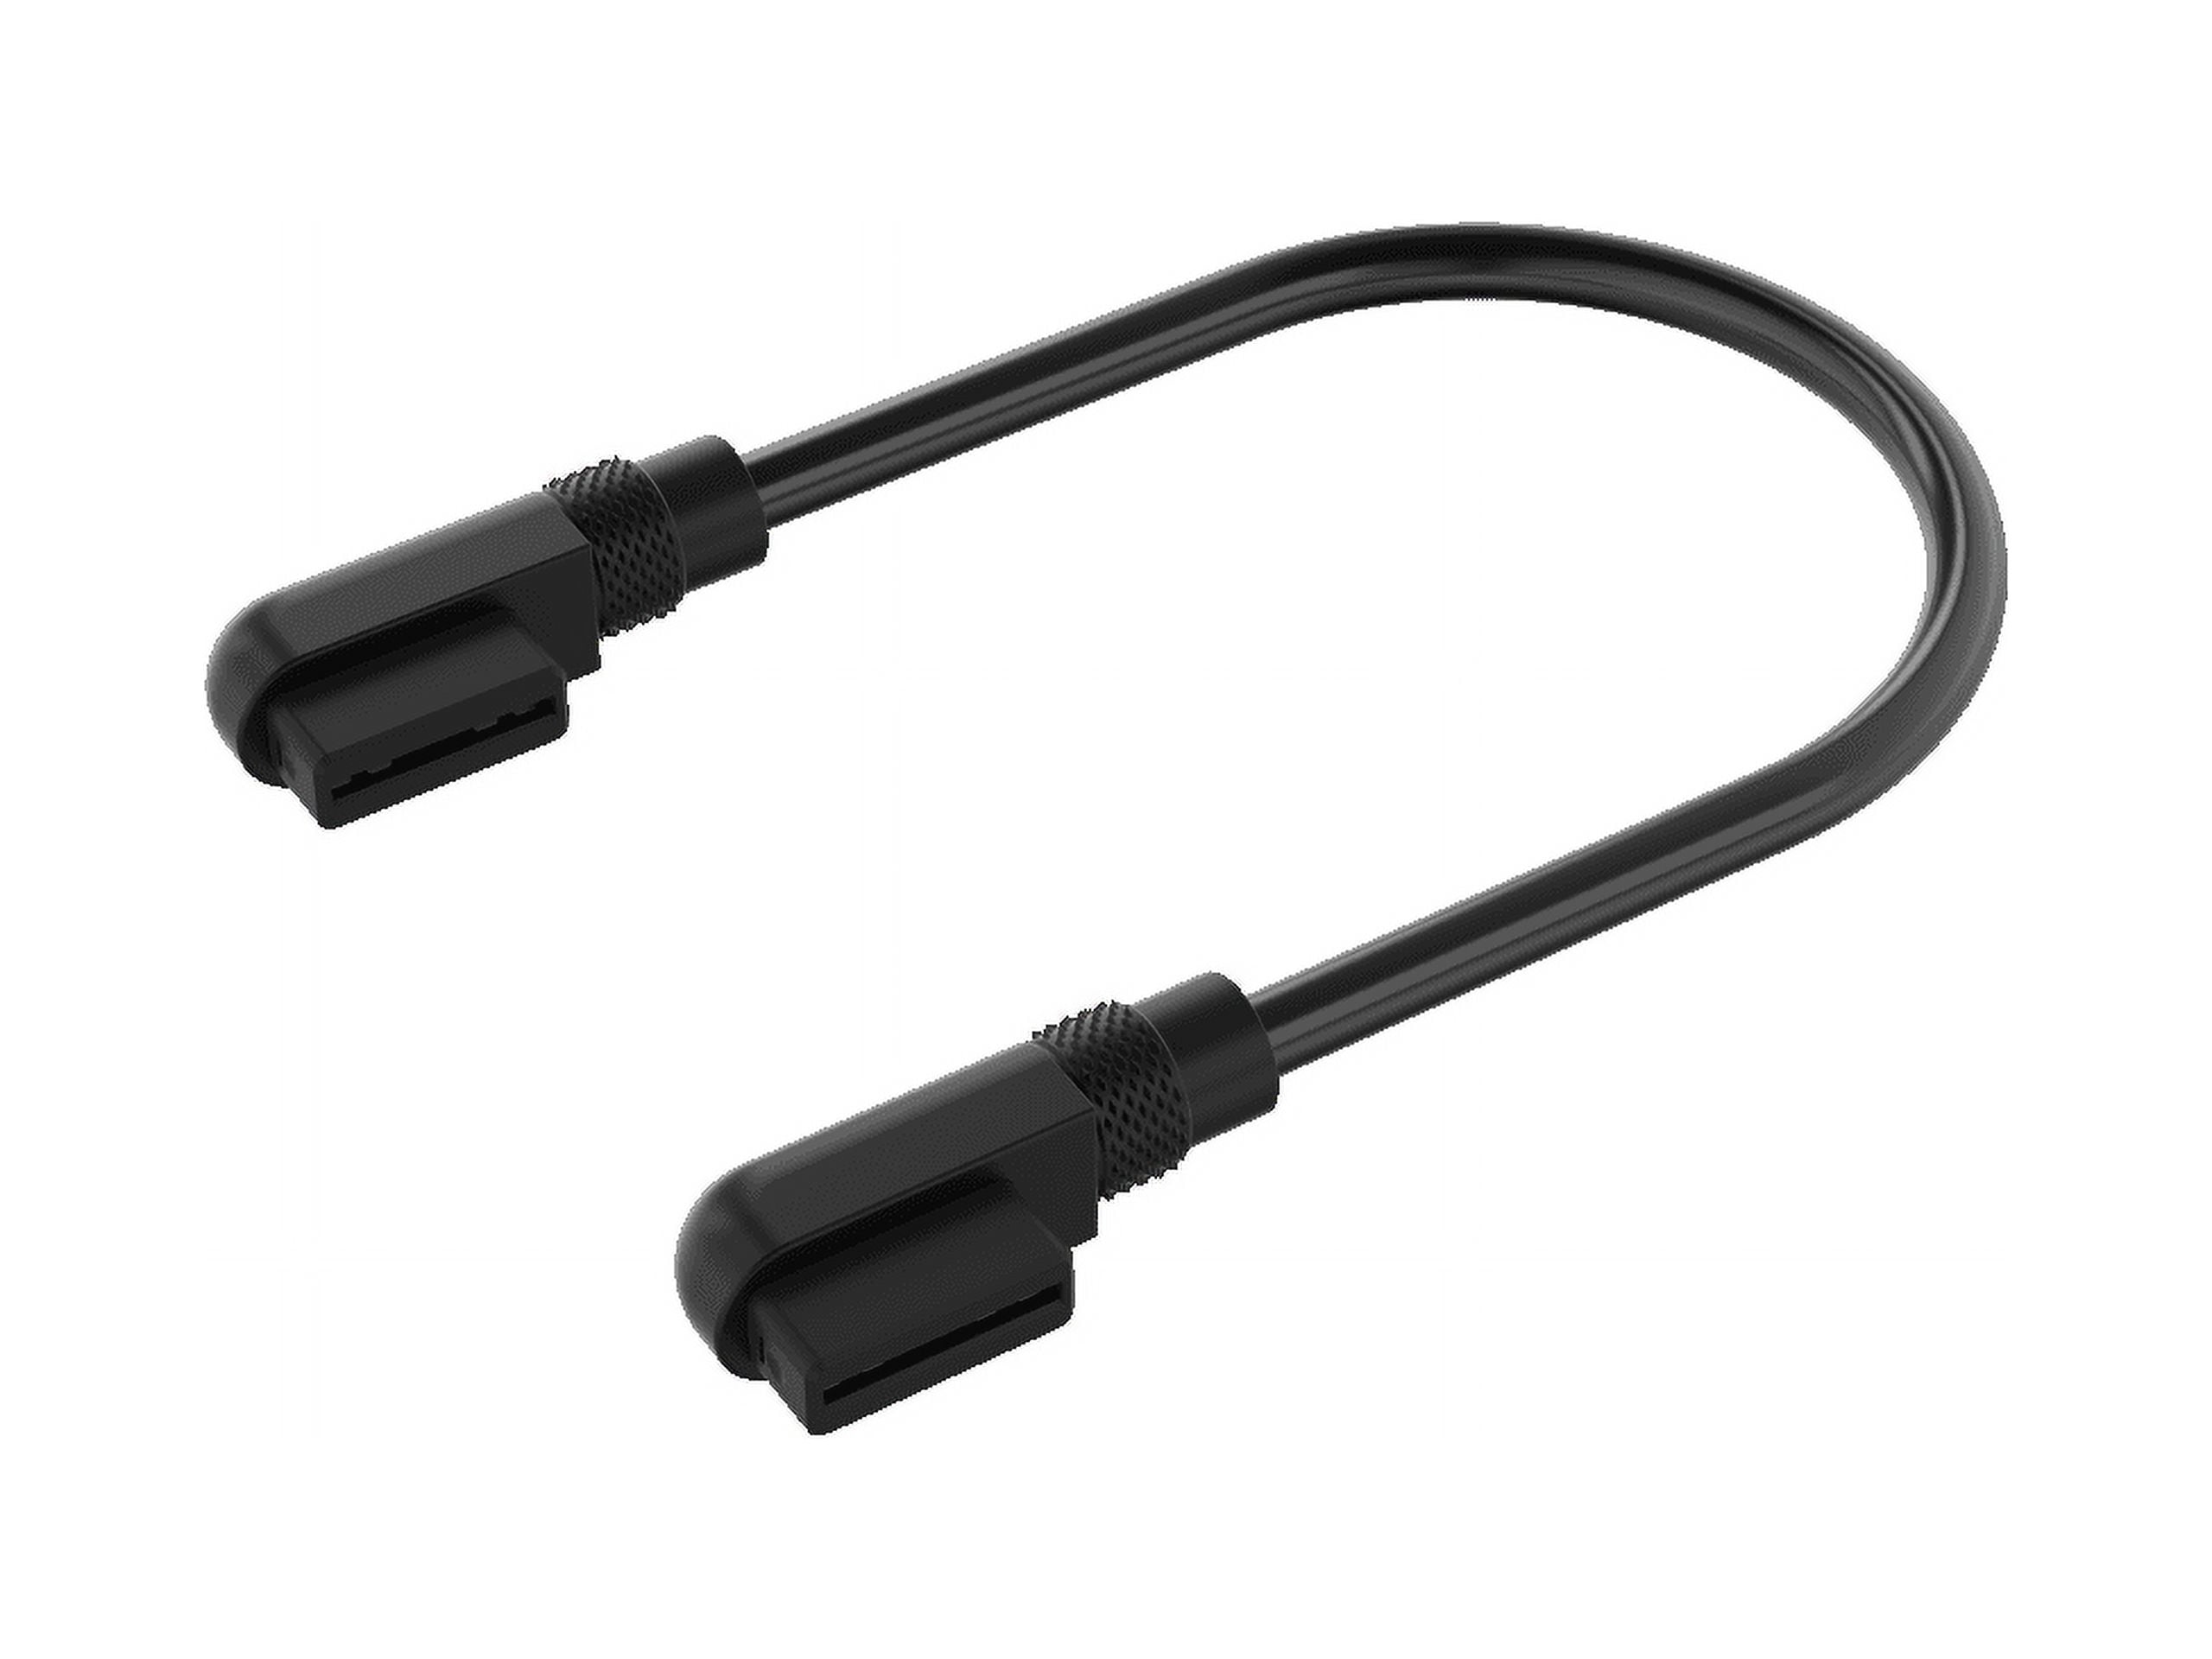 Corsair's iCUE LINK cable clutter killer will delight PC gamers